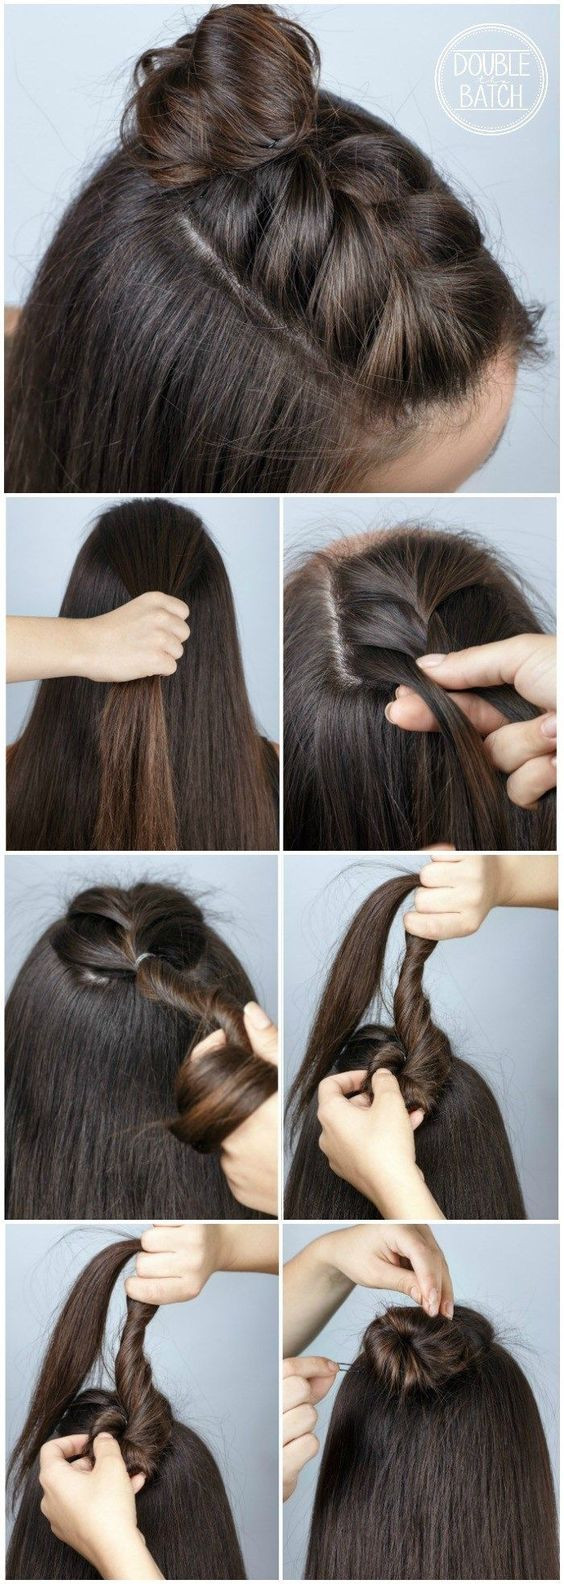 Easy Hairstyles For Medium Hair To Do At Home
 22 Quick and Easy Back to School Hairstyle Tutorials